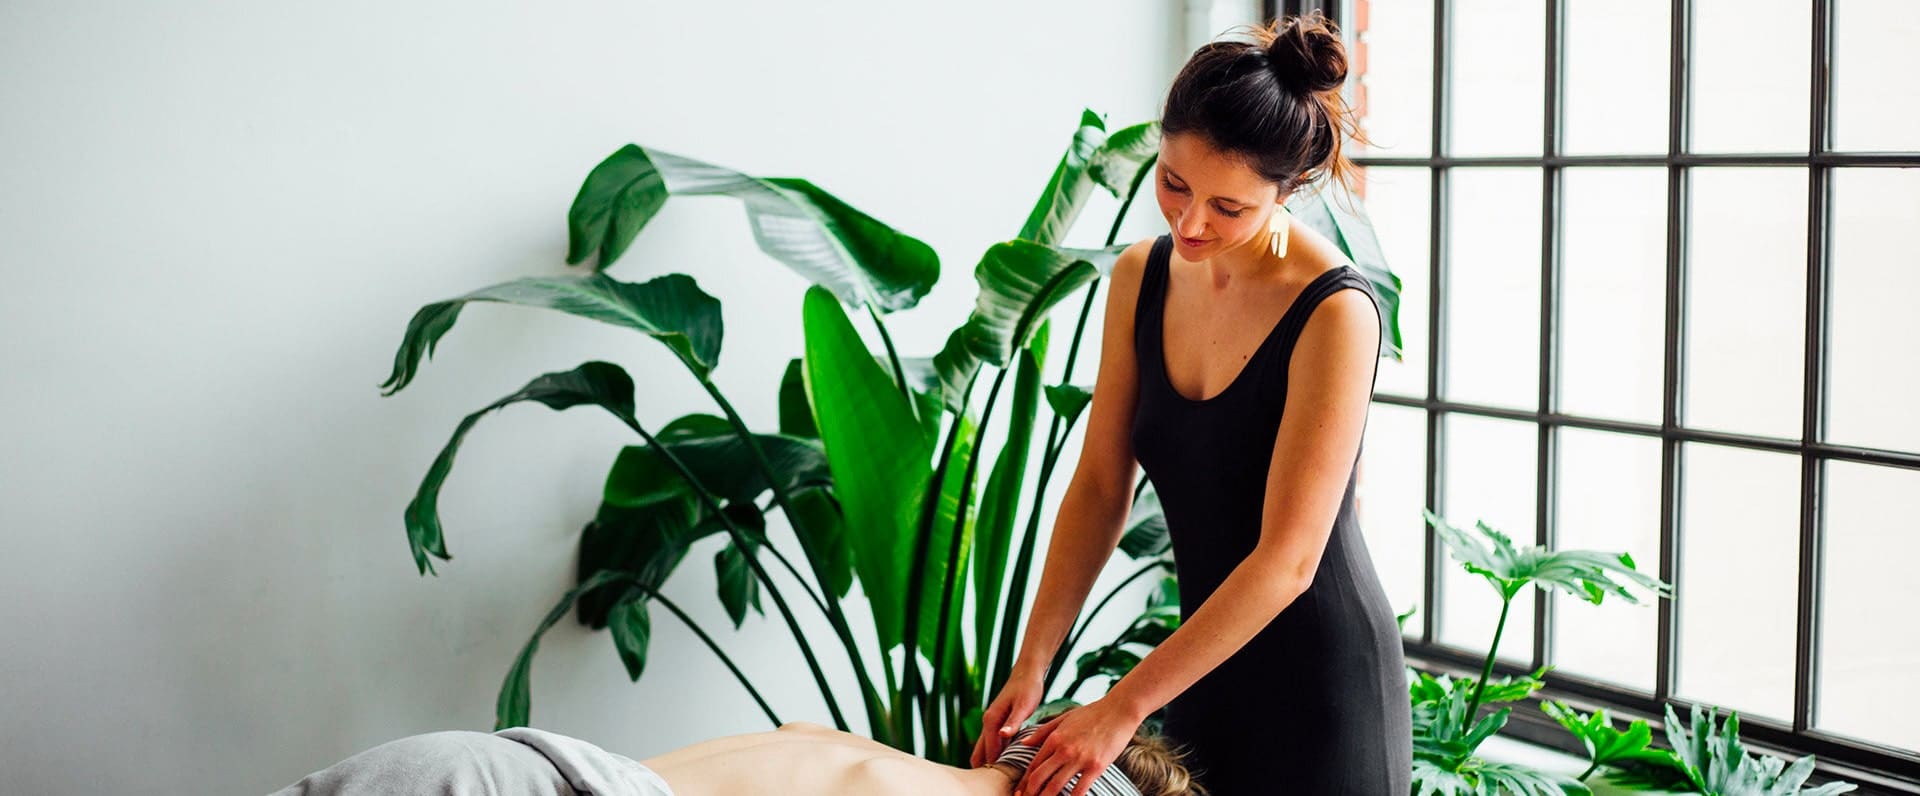 Best Naturopathic Clinics in Portland, OR